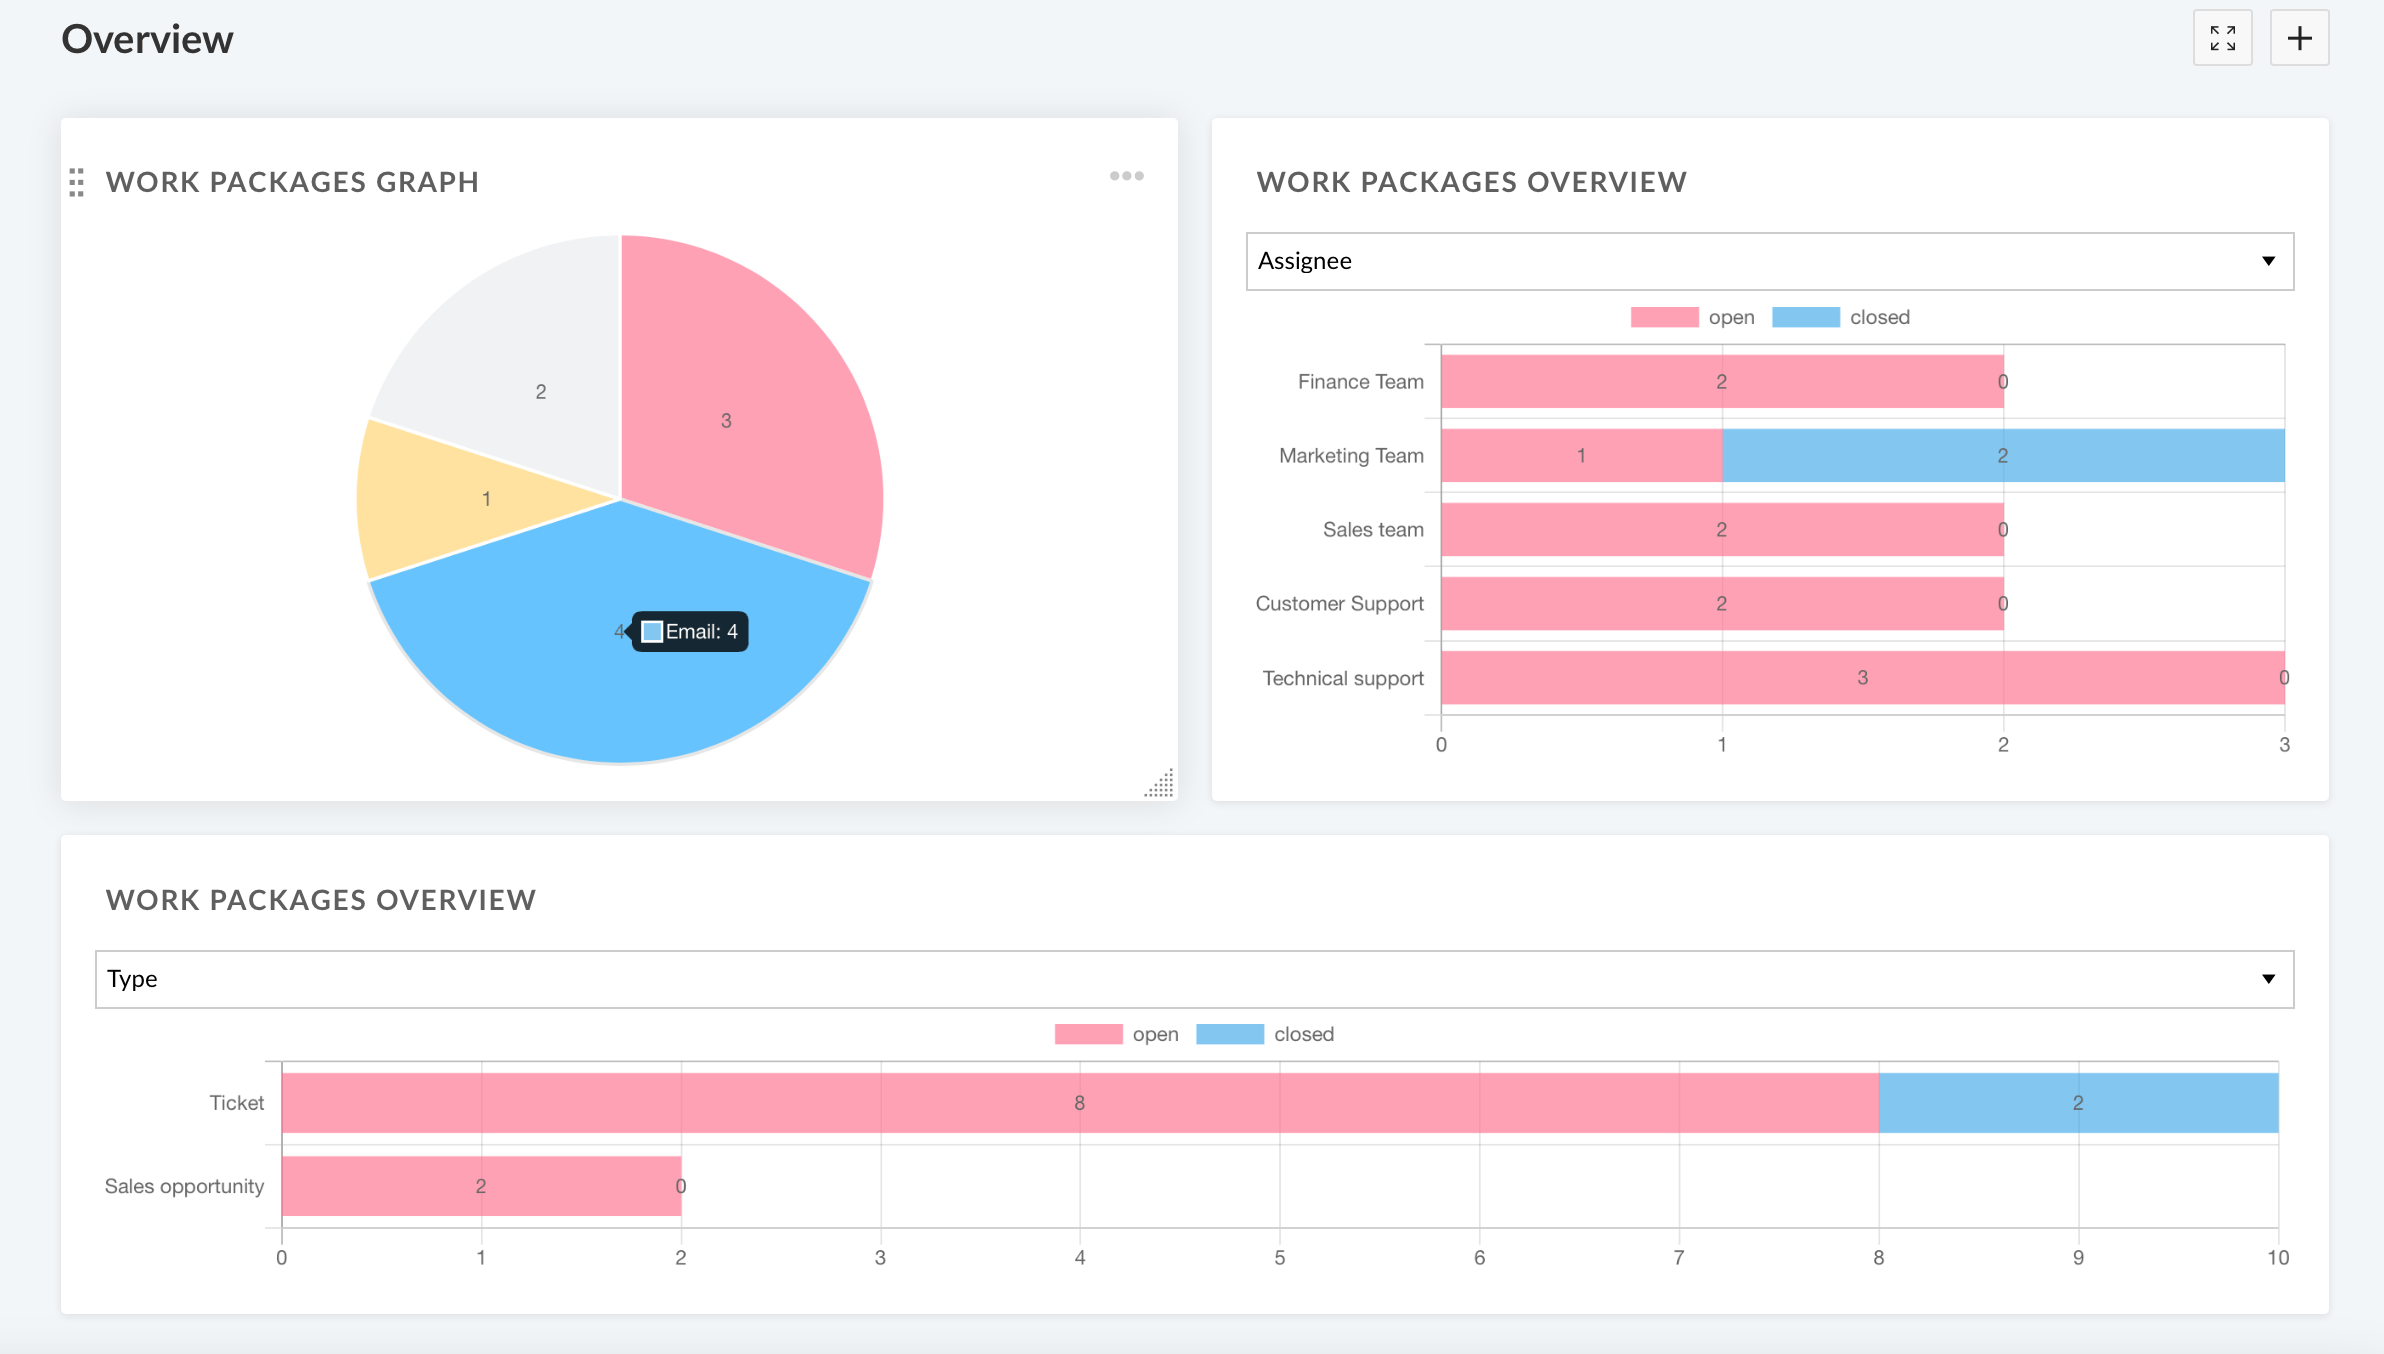 overview with graphs showing open and closed tickets tickets by assignee and by ticket type